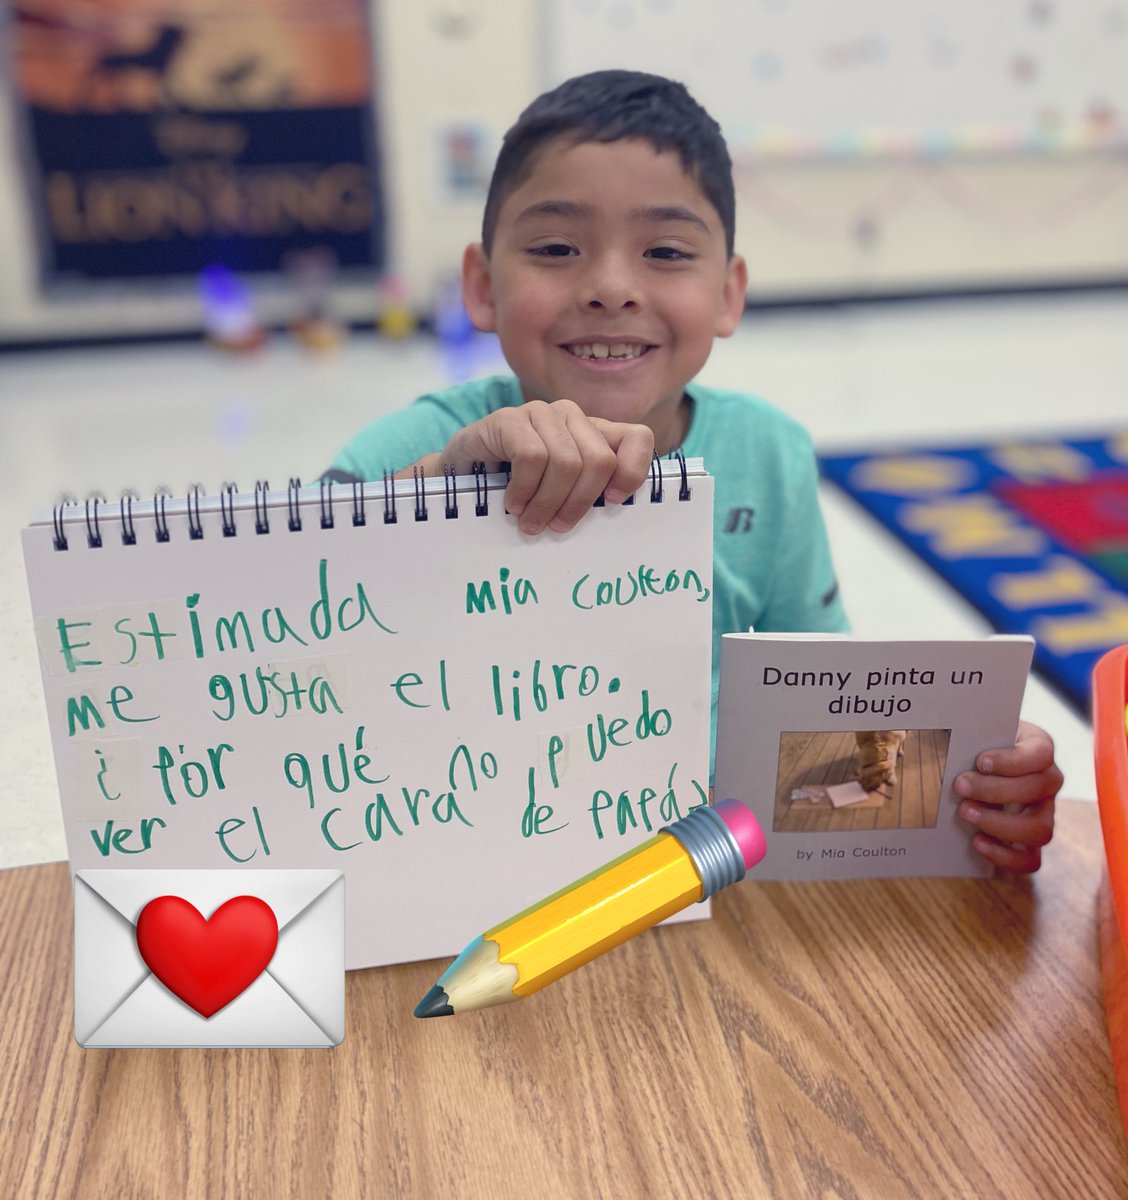 He loves reading Danny books!! He had a question for the author so he wrote a letter. ❤️✍️ (I wish @MaryRuthBooks had more Danny books in Spanish!) @rrcna_org #readingrecoveryworks #descubriendolalectura #maryruthbooks #writing